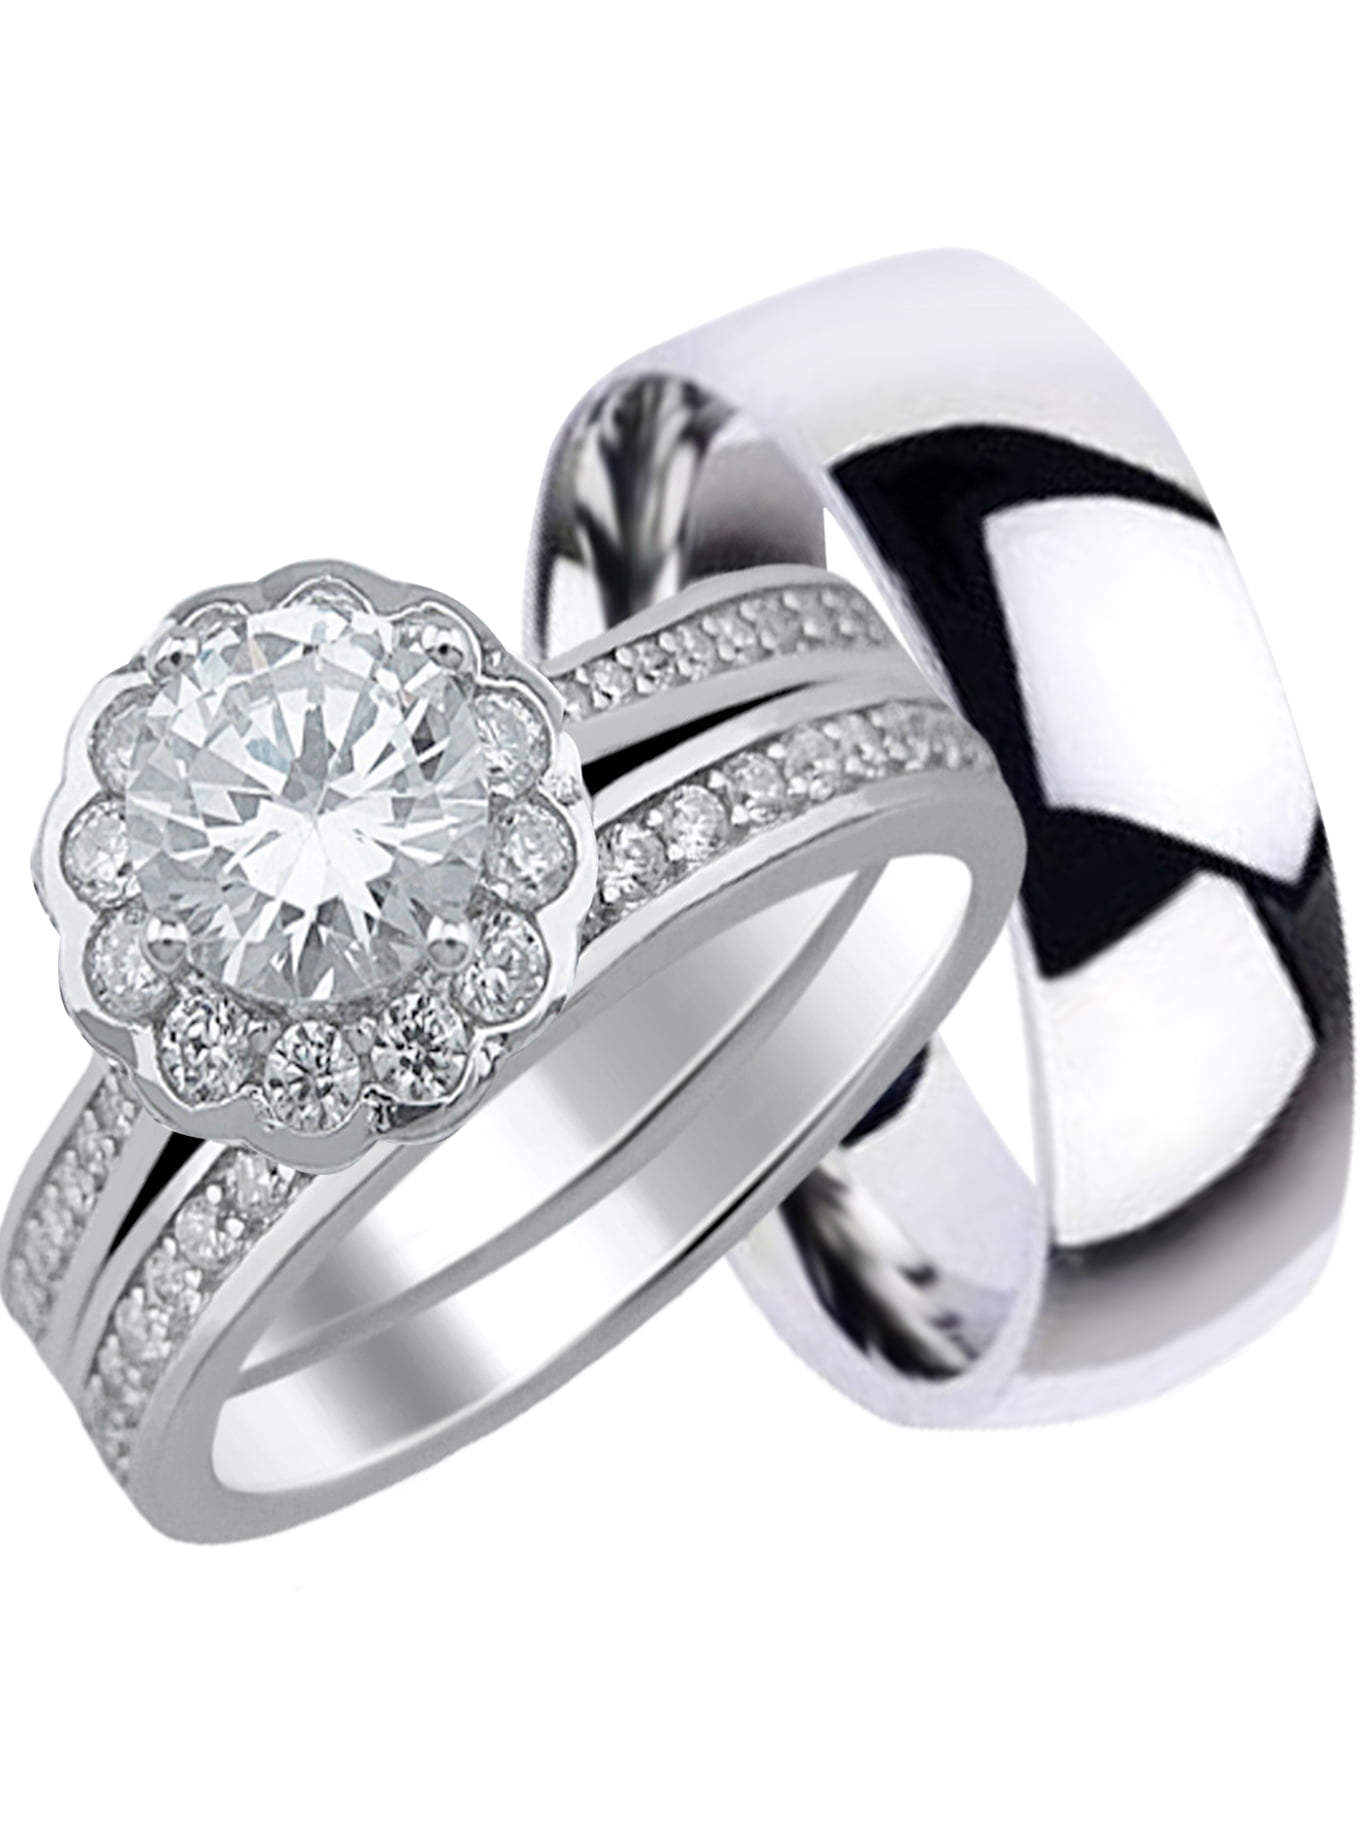  Christian  Wedding  Ring  Sets For Him  And Her  Better 